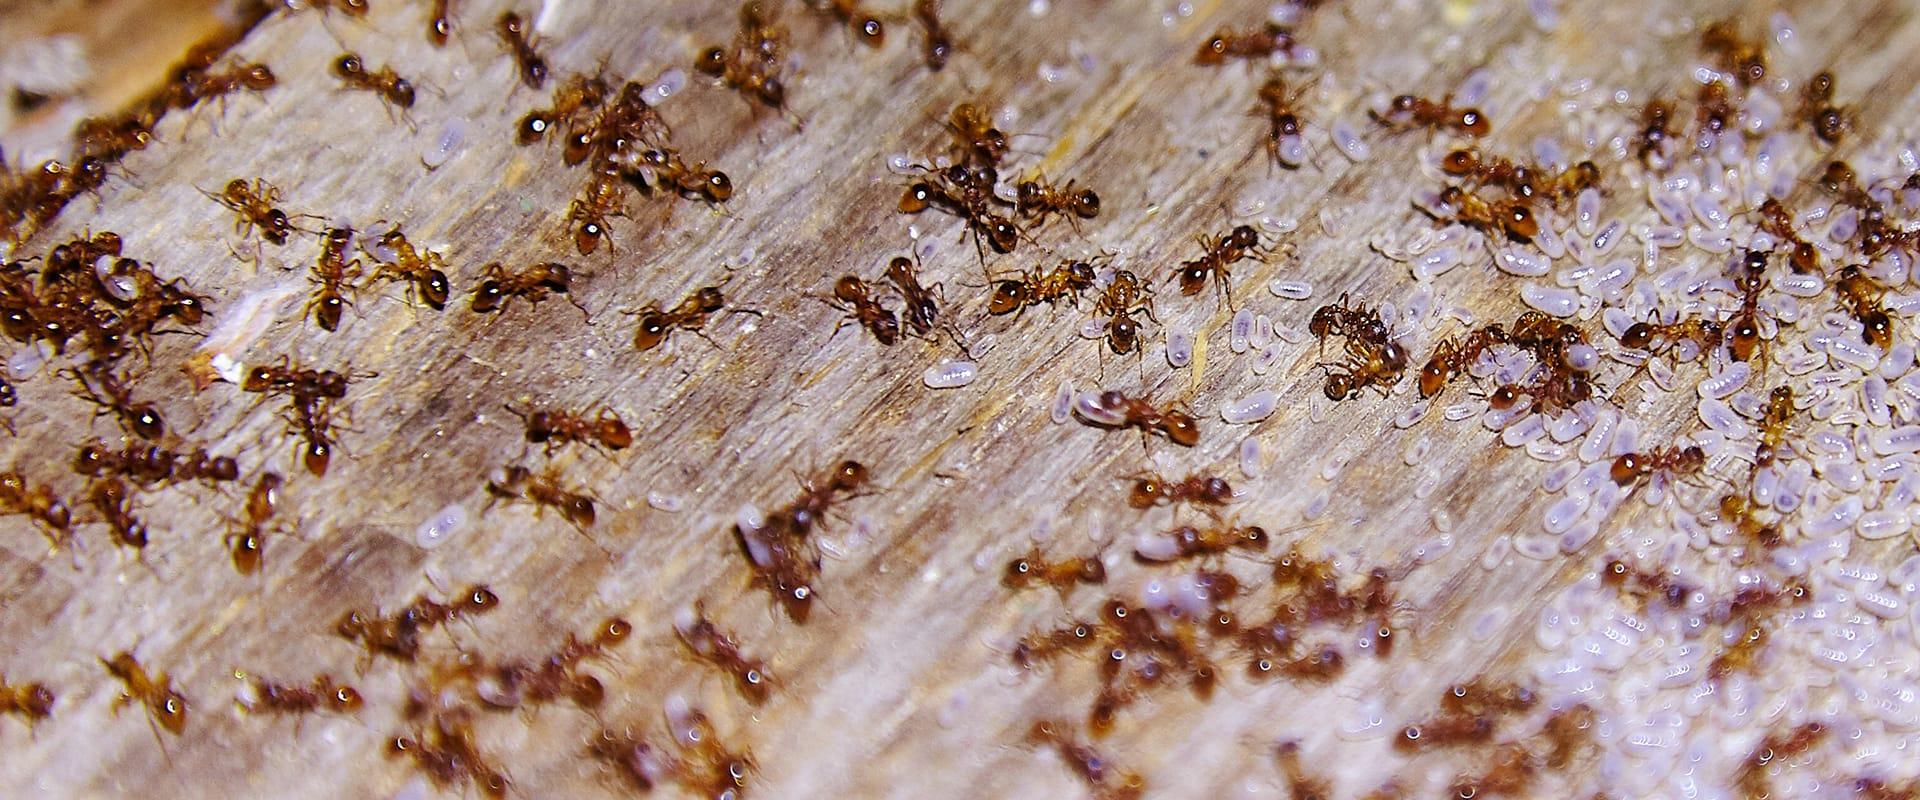 many ants crawling on the floor in a home in baton rouge louisiana